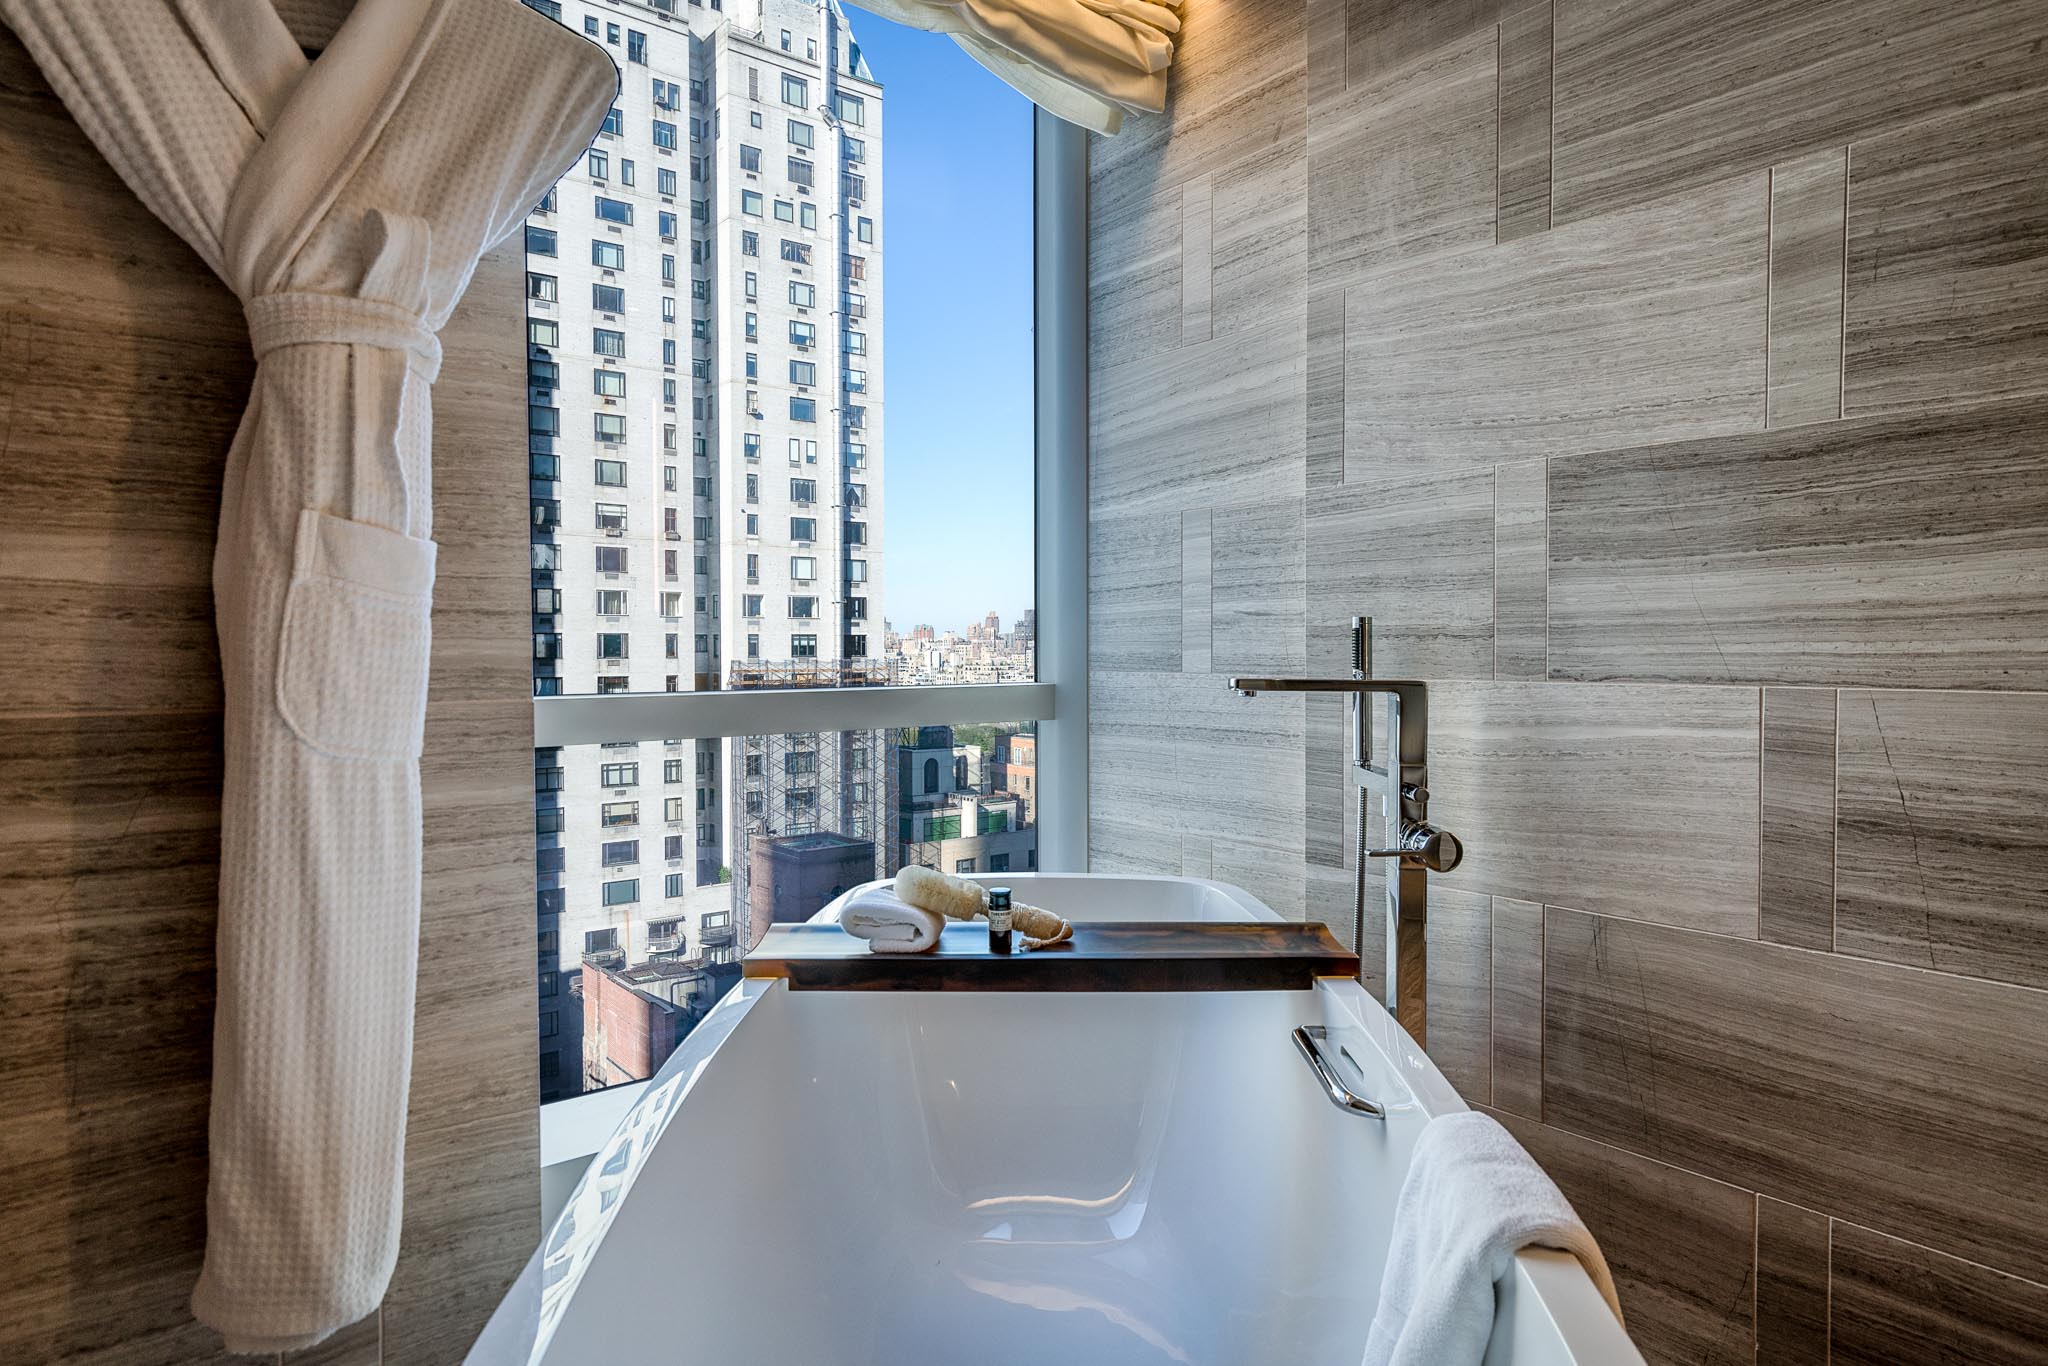 a bathtub in a bathroom with a window overlooking a city